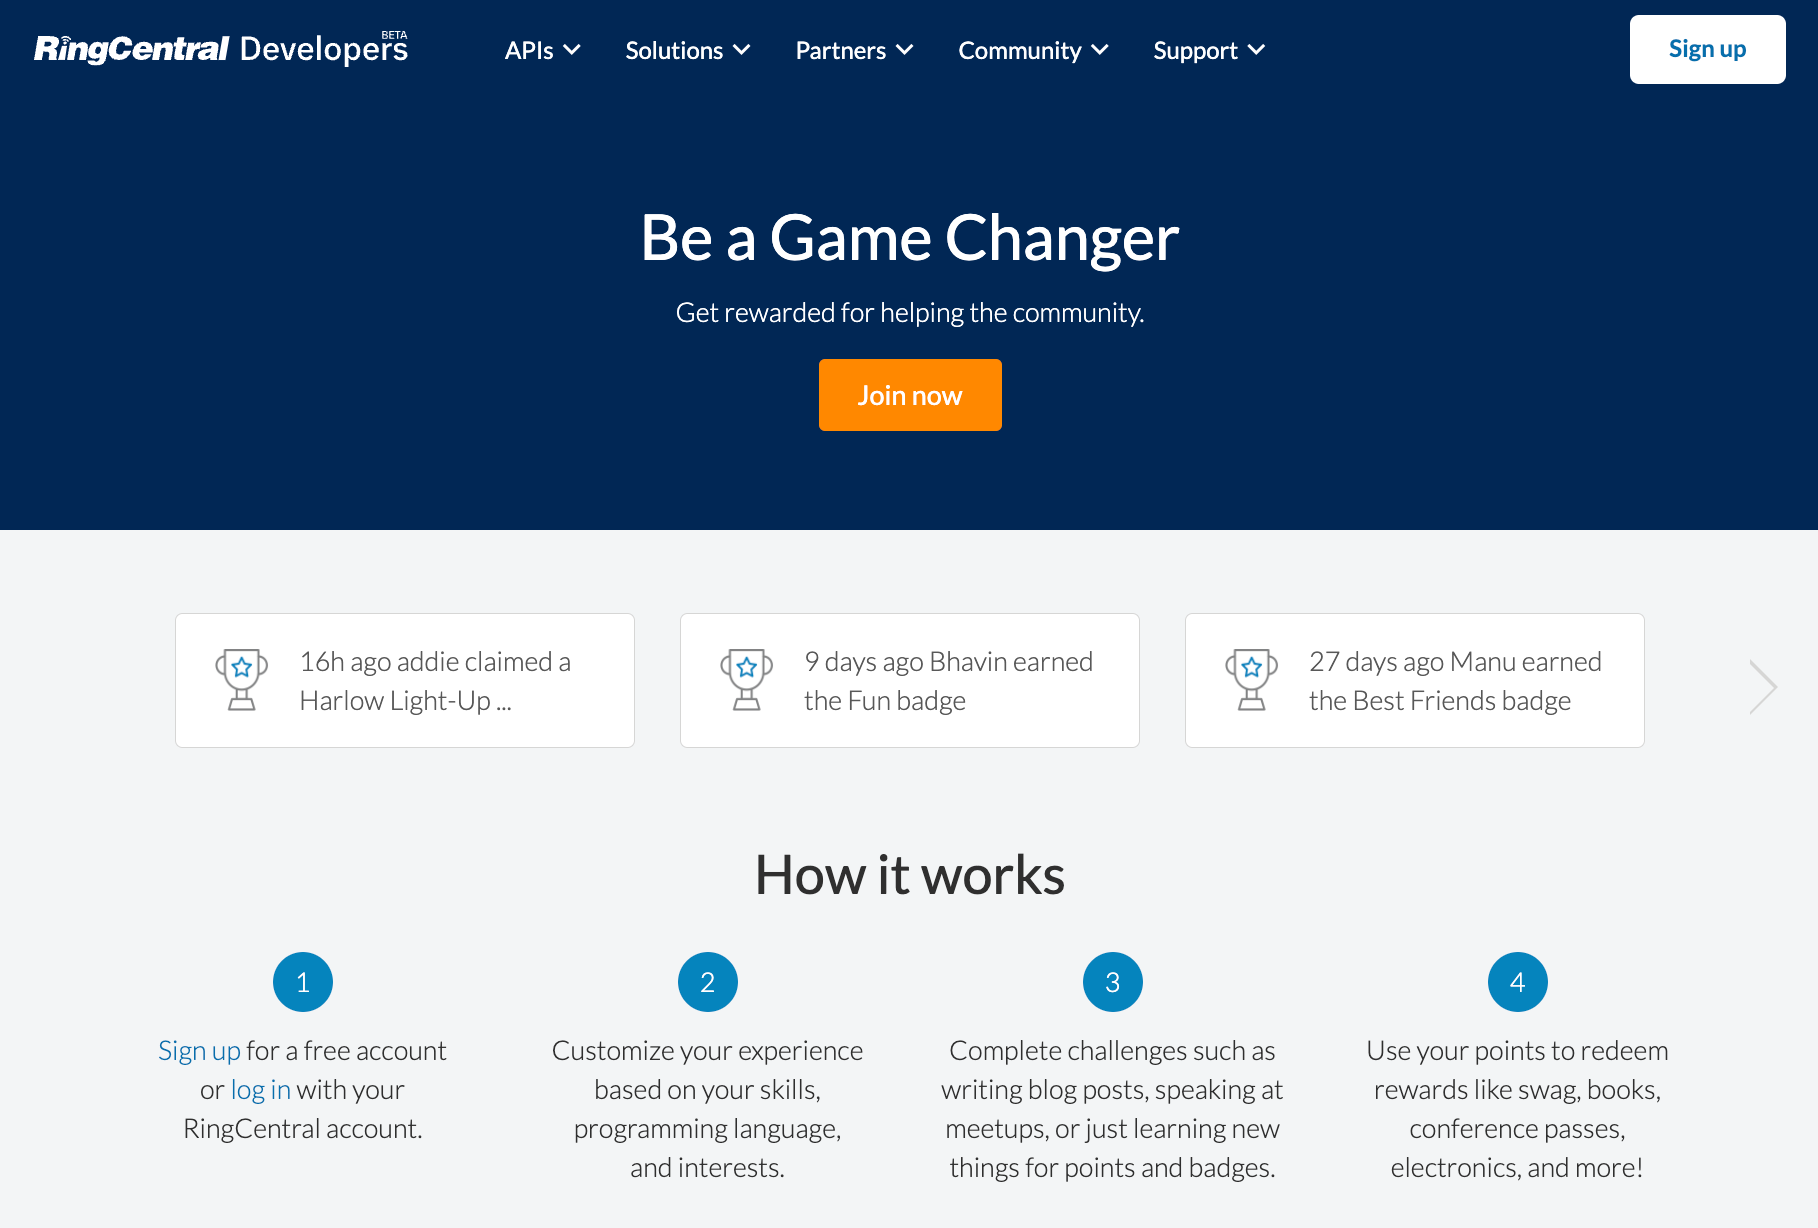 Be a Game Changer landing page on RingCentral's devportal.